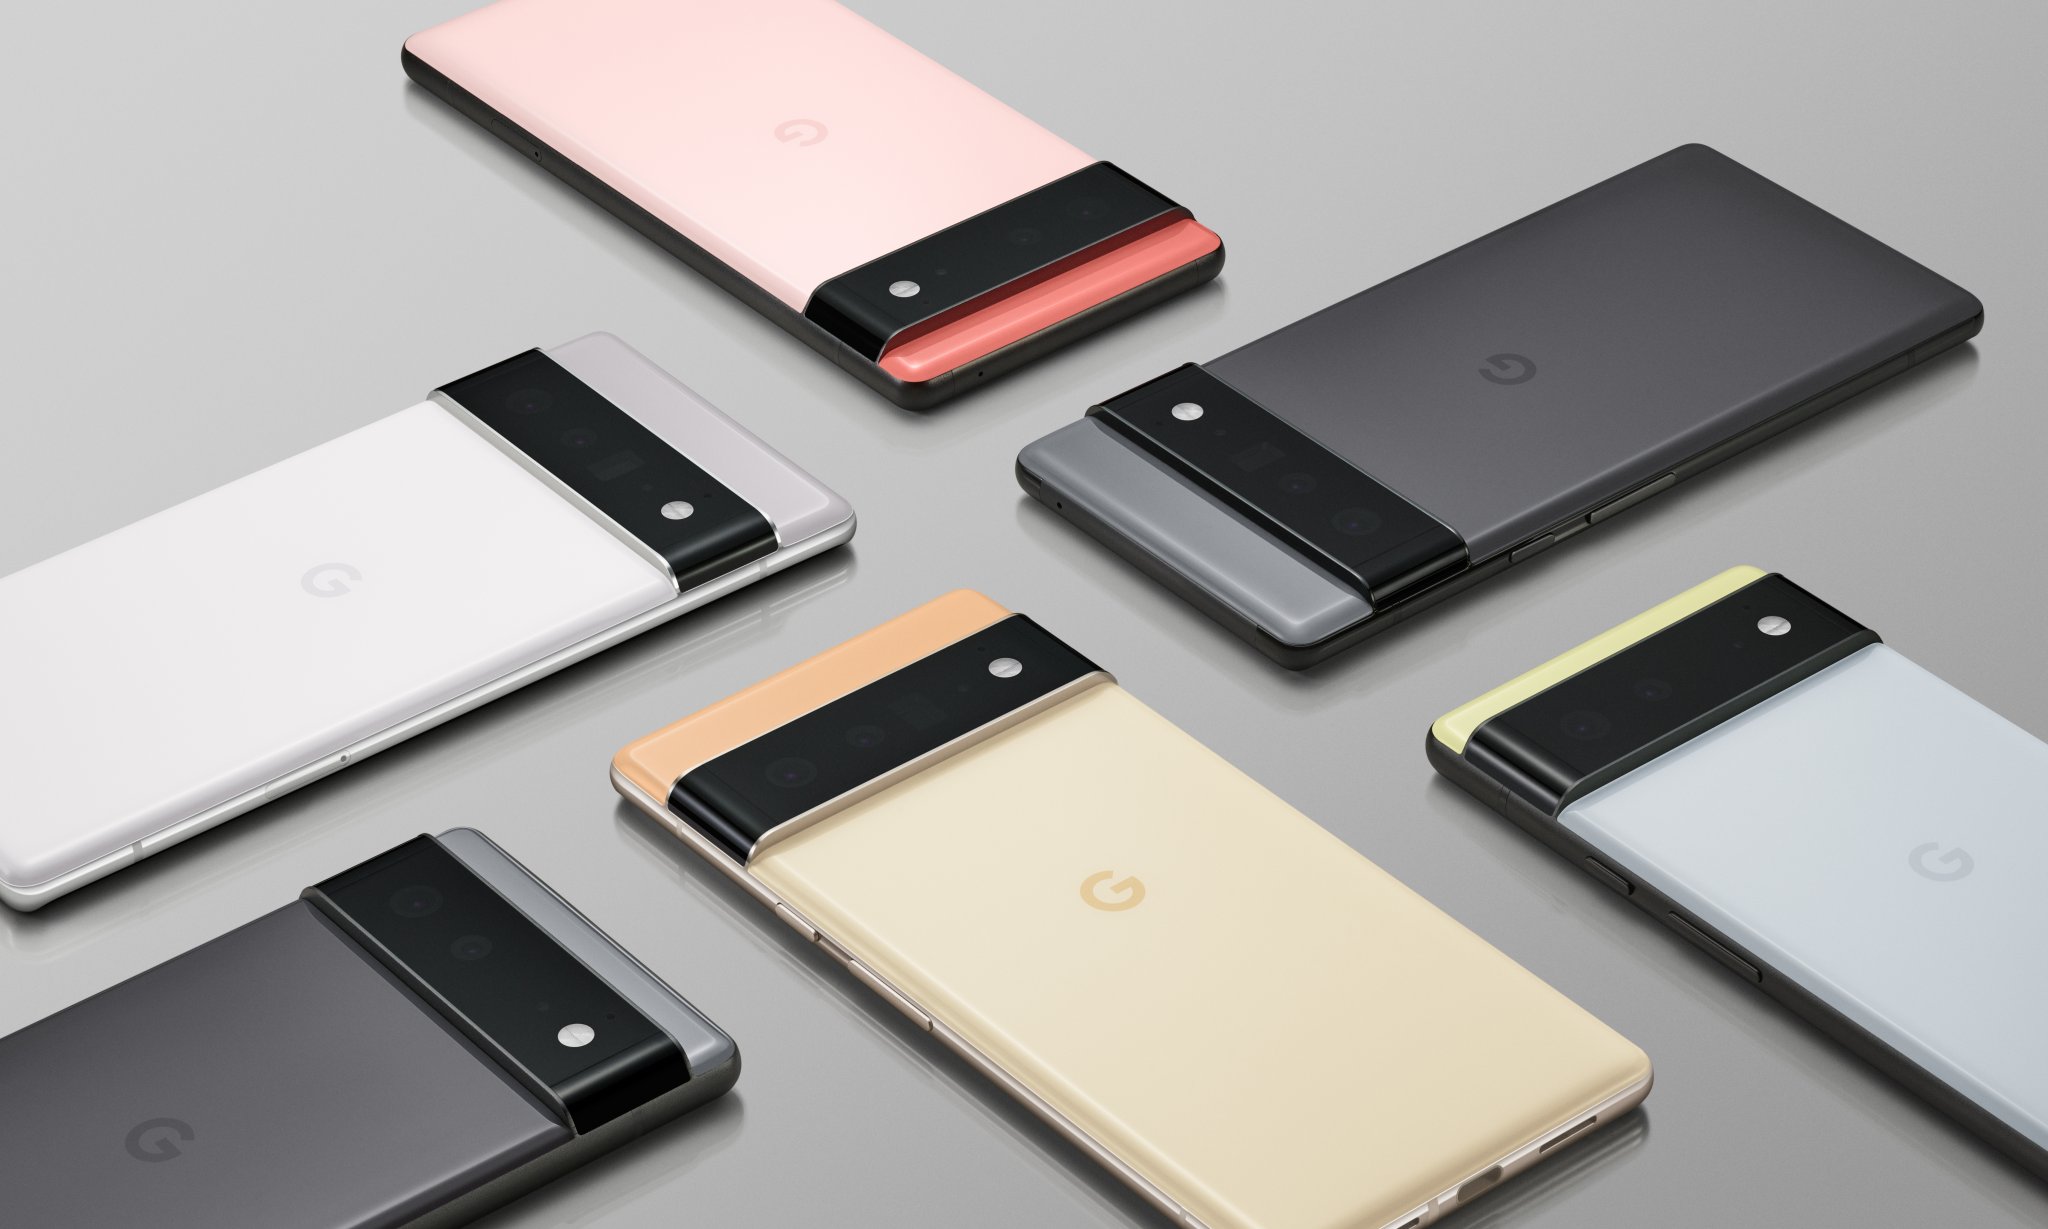 Google Pixel 6 phones launch with custom chips and aggressive pricing